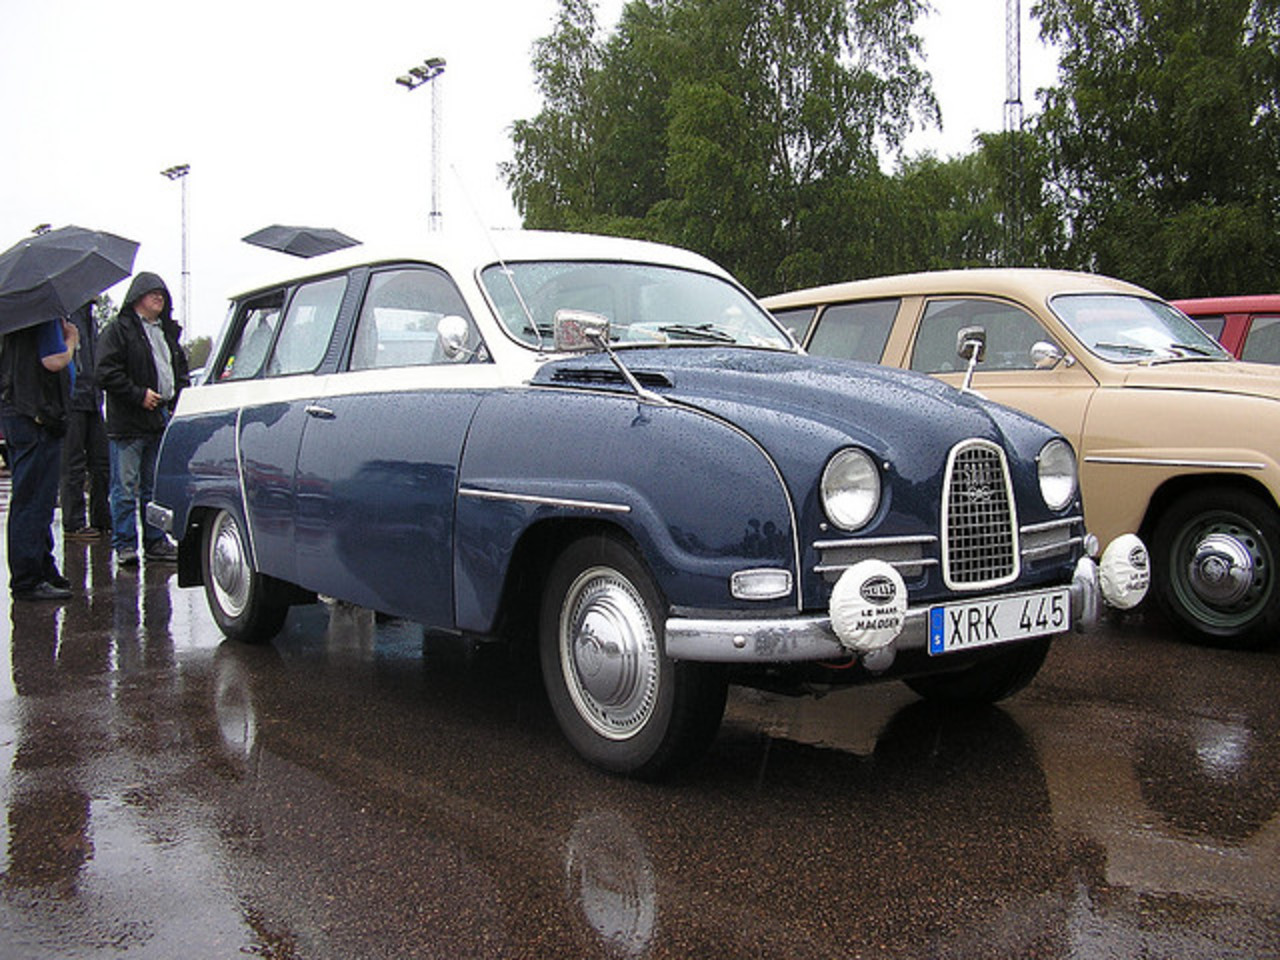 Saab 95 DE LUXE Photo Gallery: Photo #07 out of 11, Image Size ...